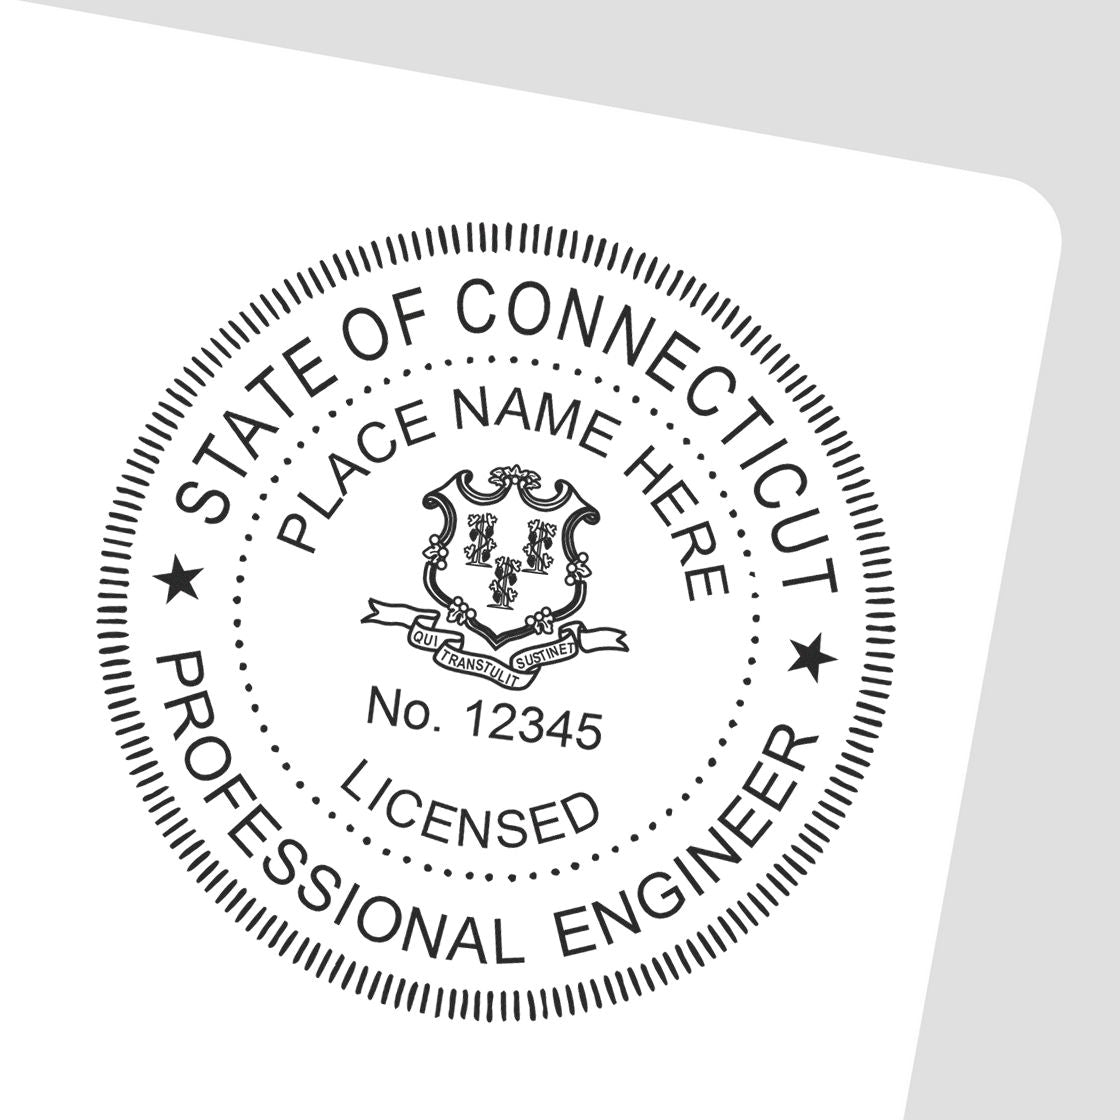 This paper is stamped with a sample imprint of the Connecticut Professional Engineer Seal Stamp, signifying its quality and reliability.